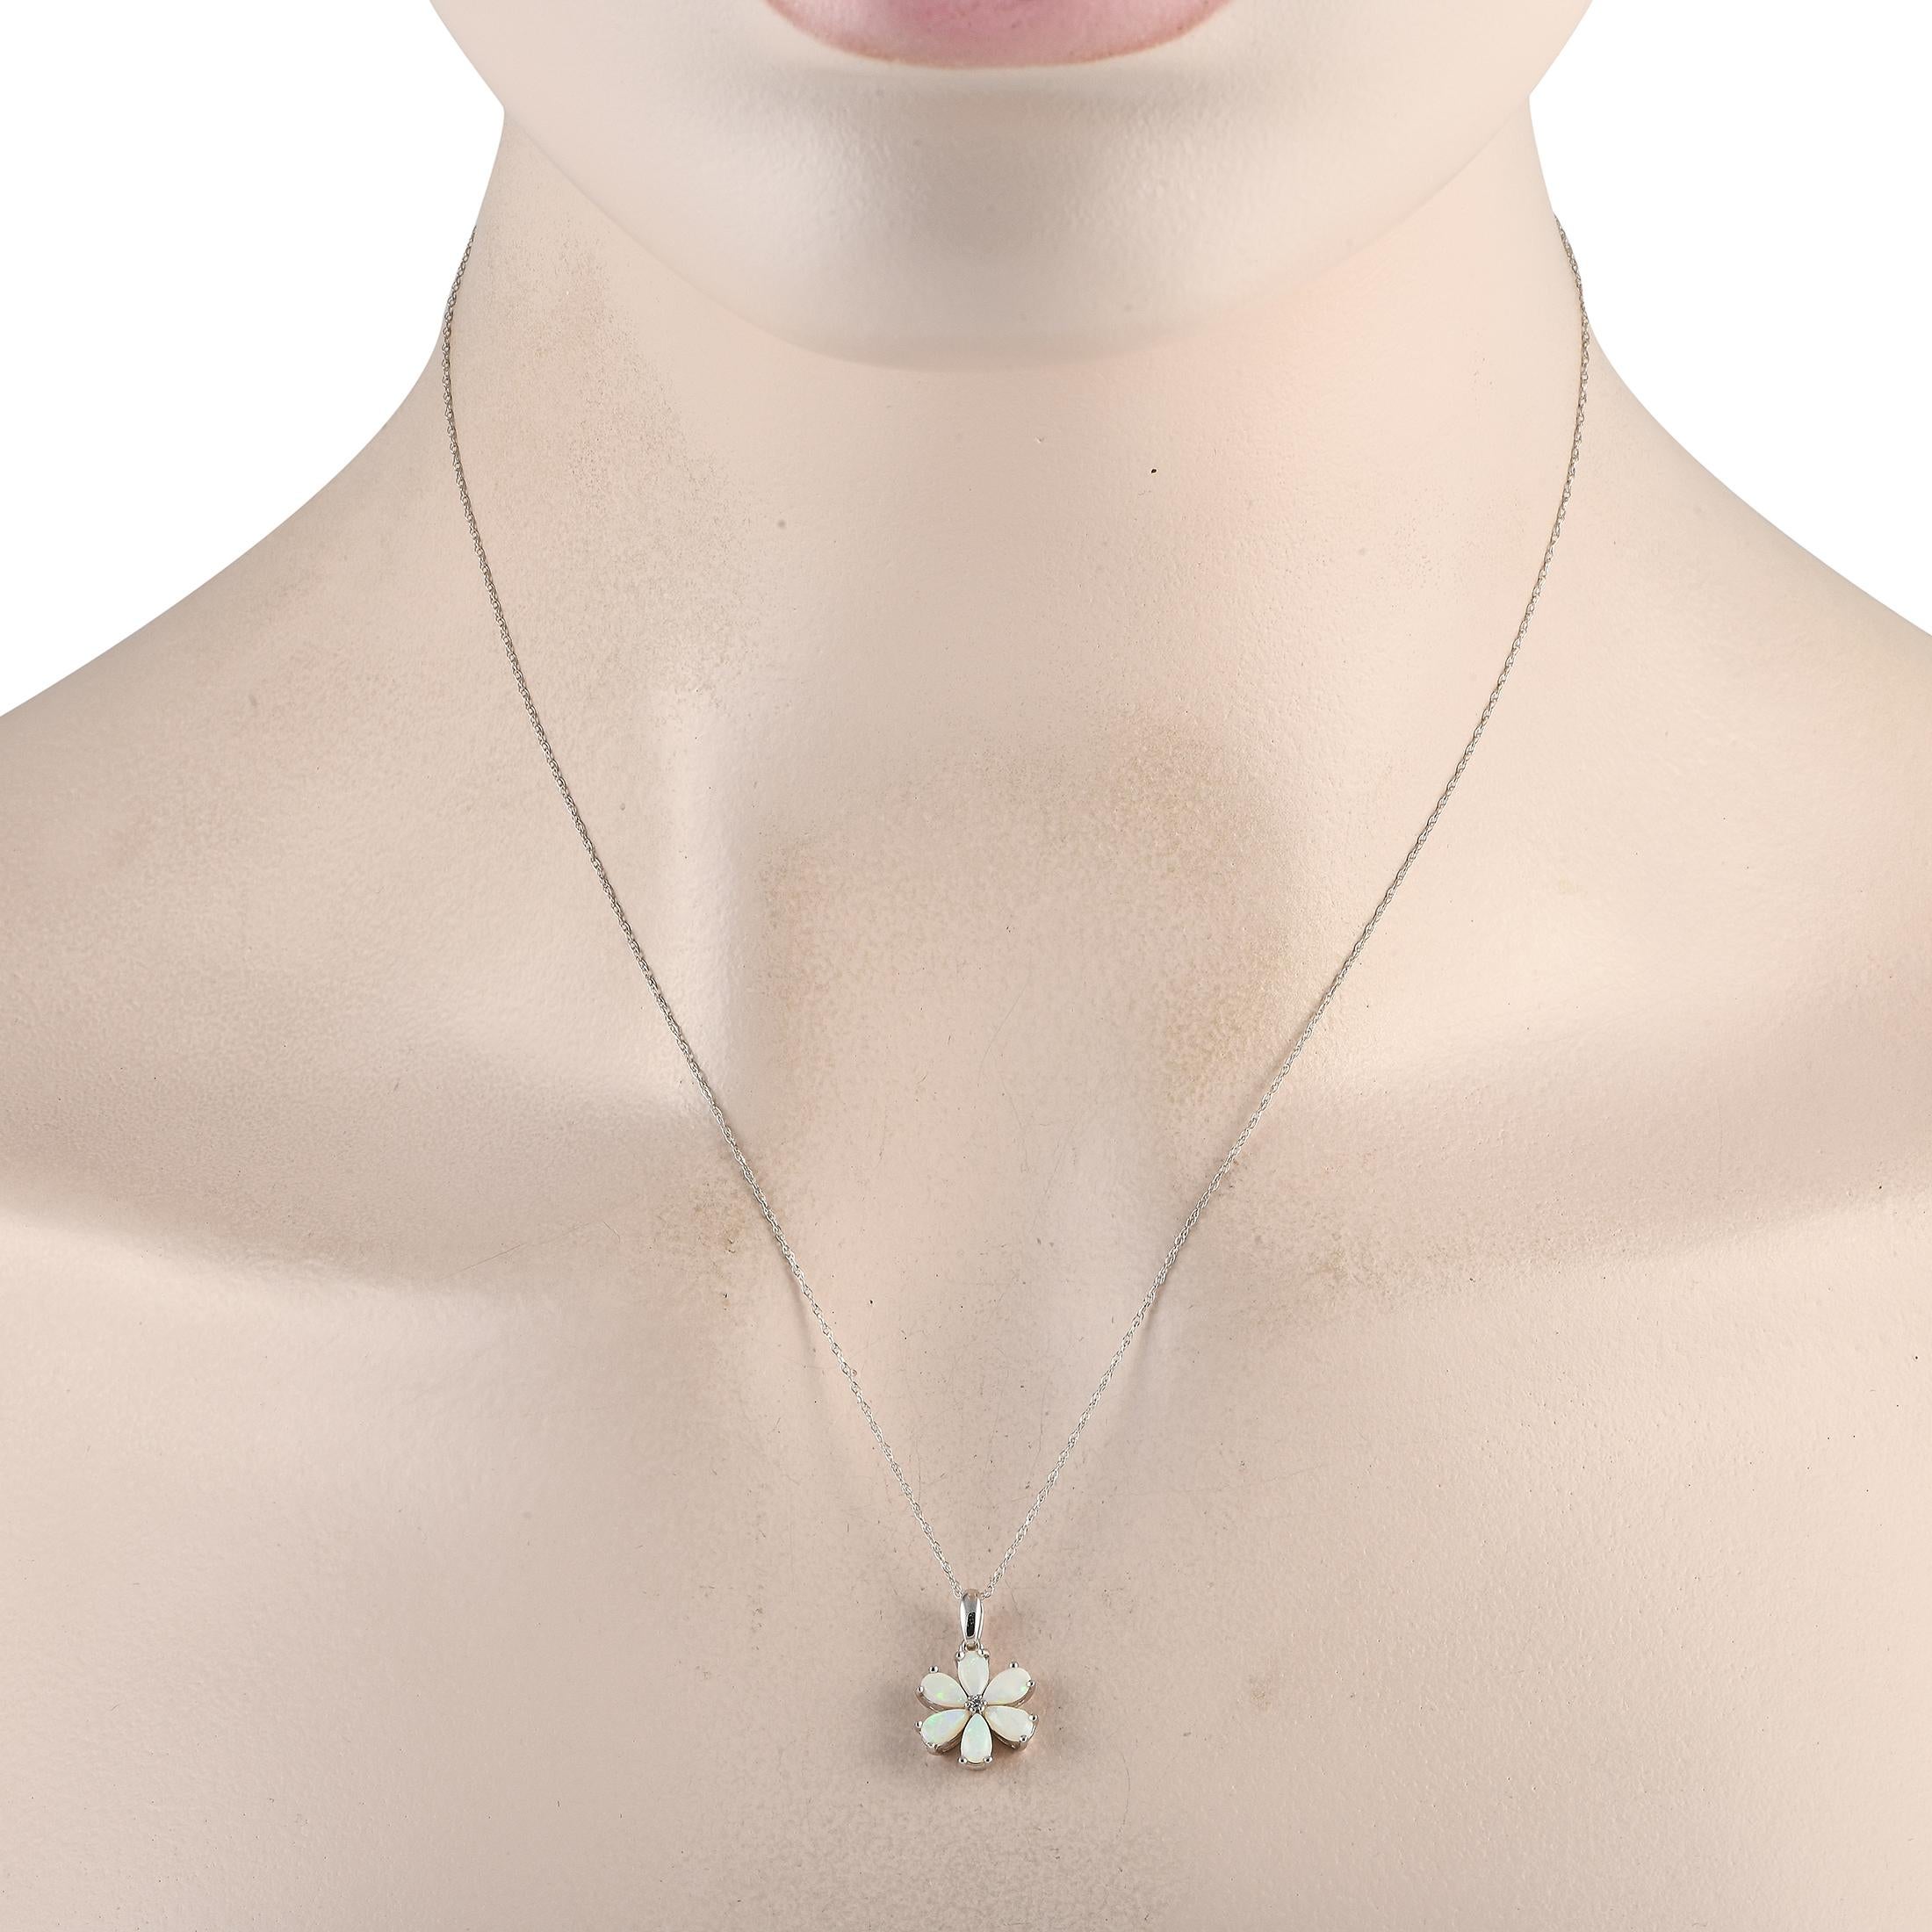 A floral shaped pendant makes a statement on this simple, elegant necklace. Crafted from 14K White Gold, the pendant comes to life thanks to radiant Opal petals and a single 0.01 carat Diamond stone at the center. It measures 0.75 long by 0.50 wide